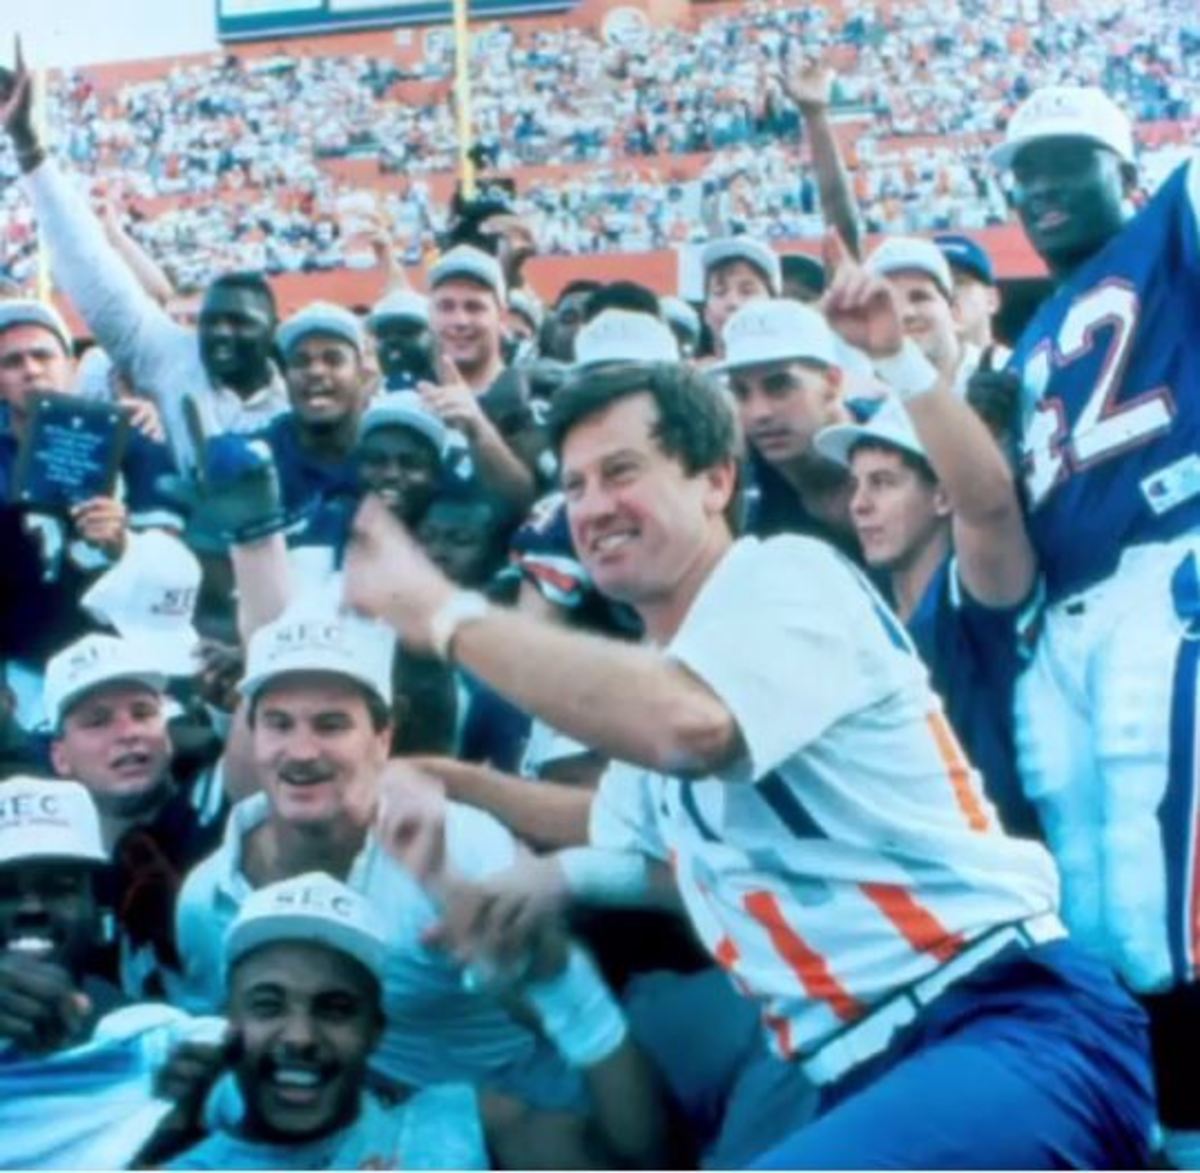 Steve Spurrier posses for a throw back picture with the Gators.